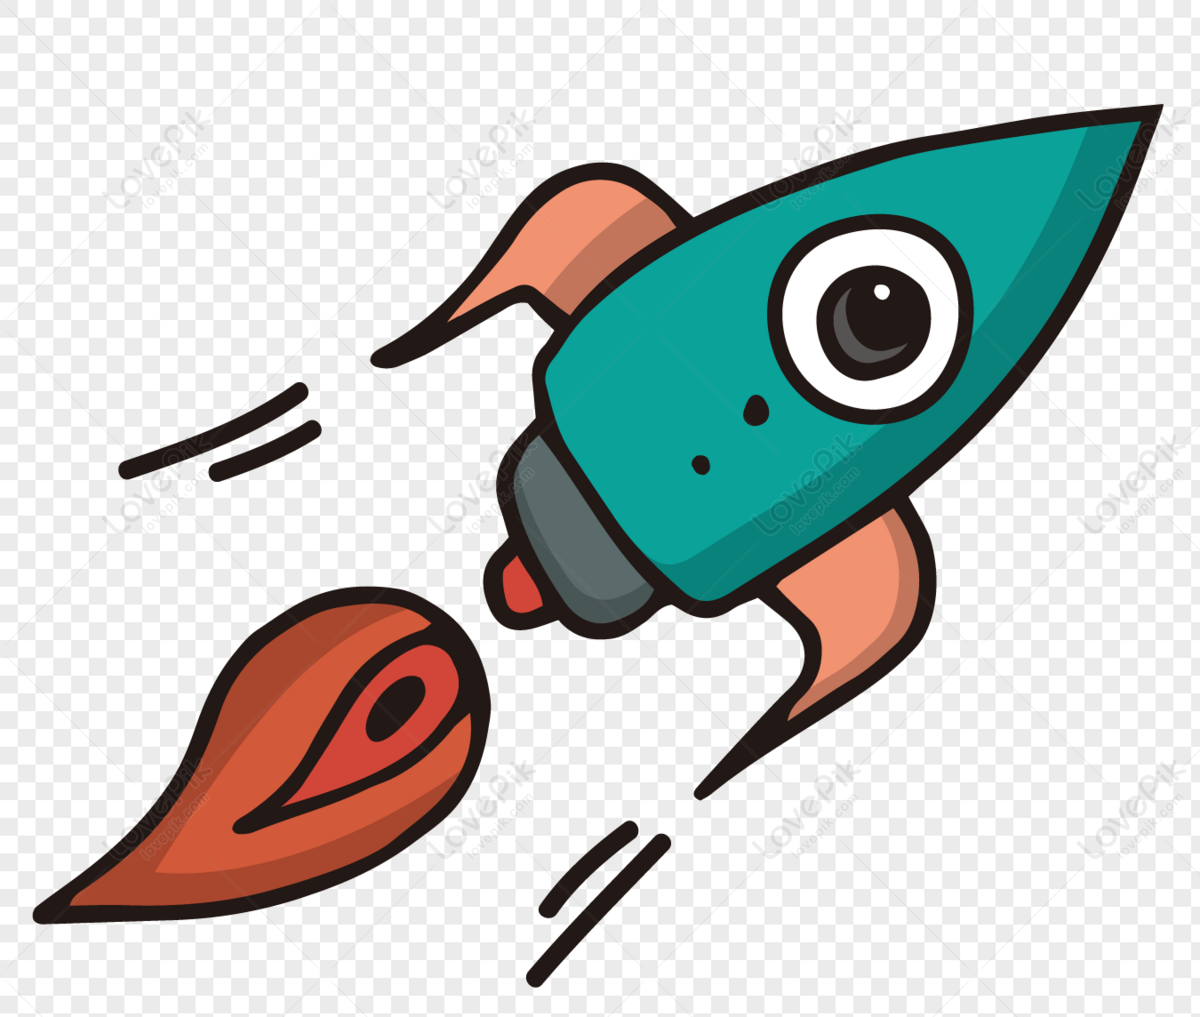 Cartoon Rocket Launch PNG Transparent And Clipart Image For Free Download -  Lovepik | 400382516